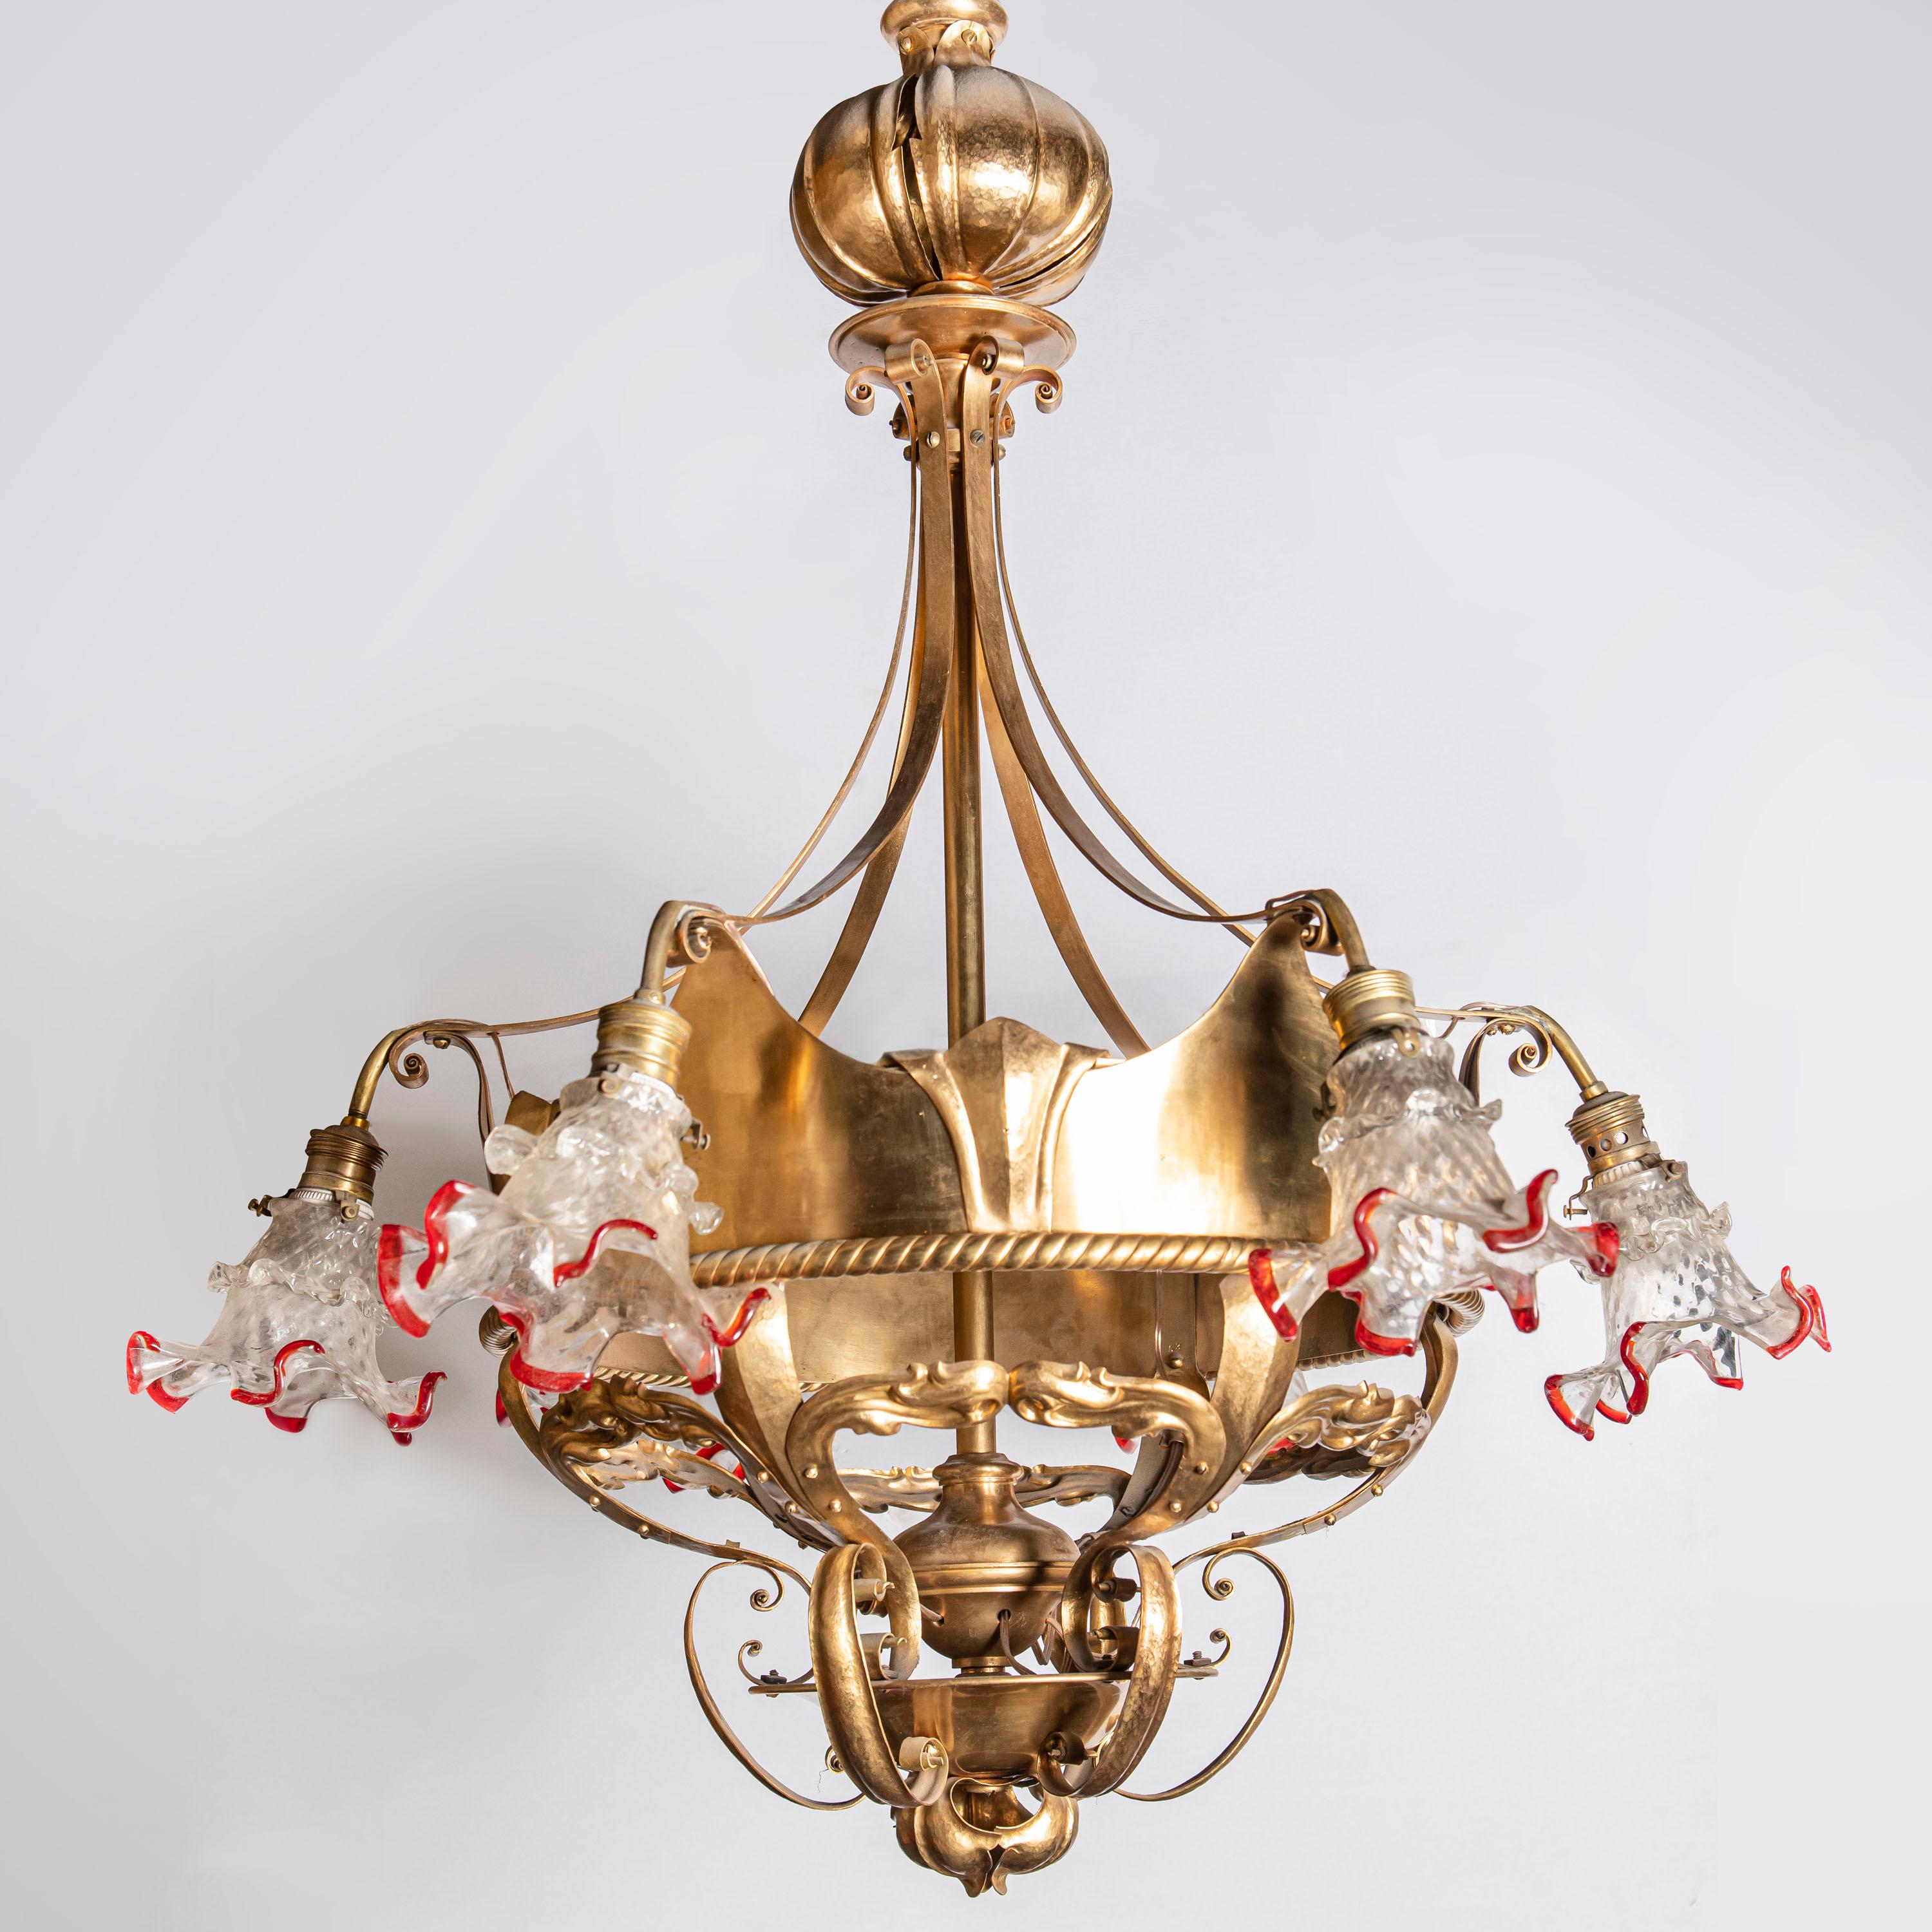 Pair of hammered gilt bronze and glass chandeliers. France, early 20th century.